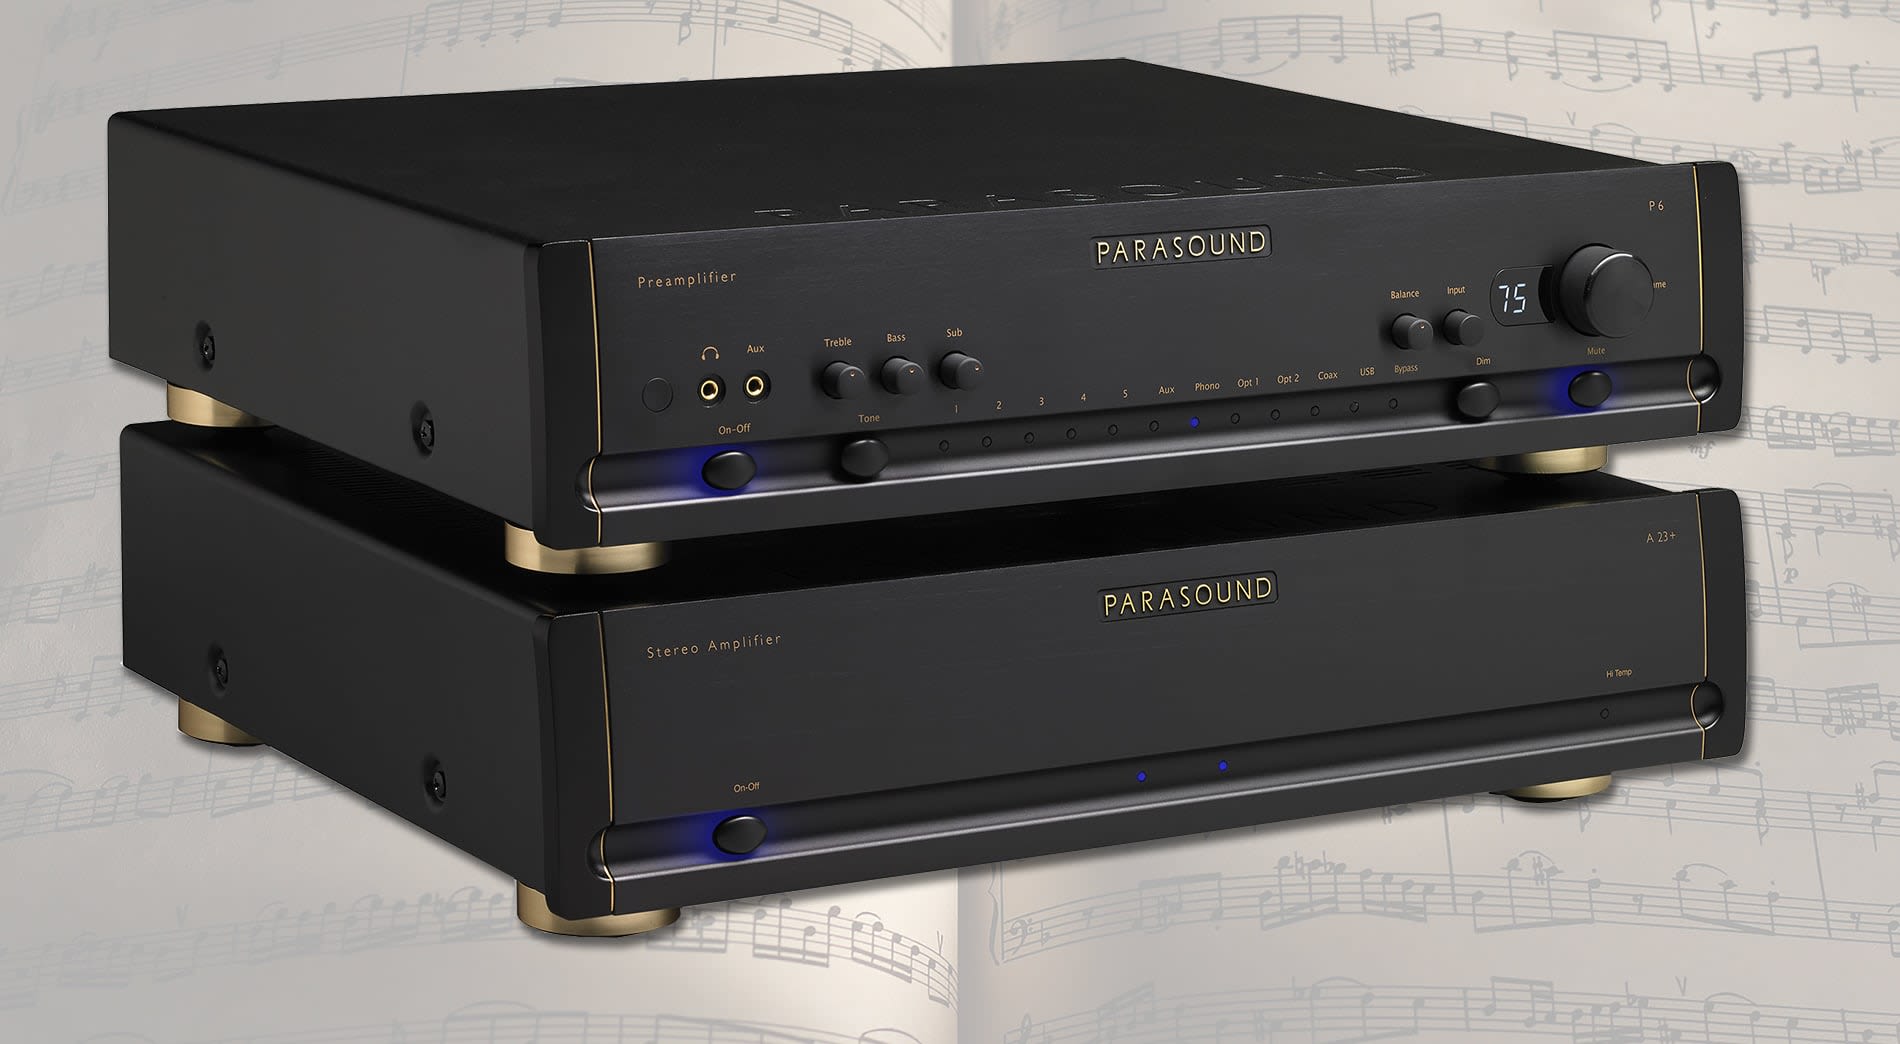 Parasound’s feature-packed high-end amplifier is a knockout, - CNet